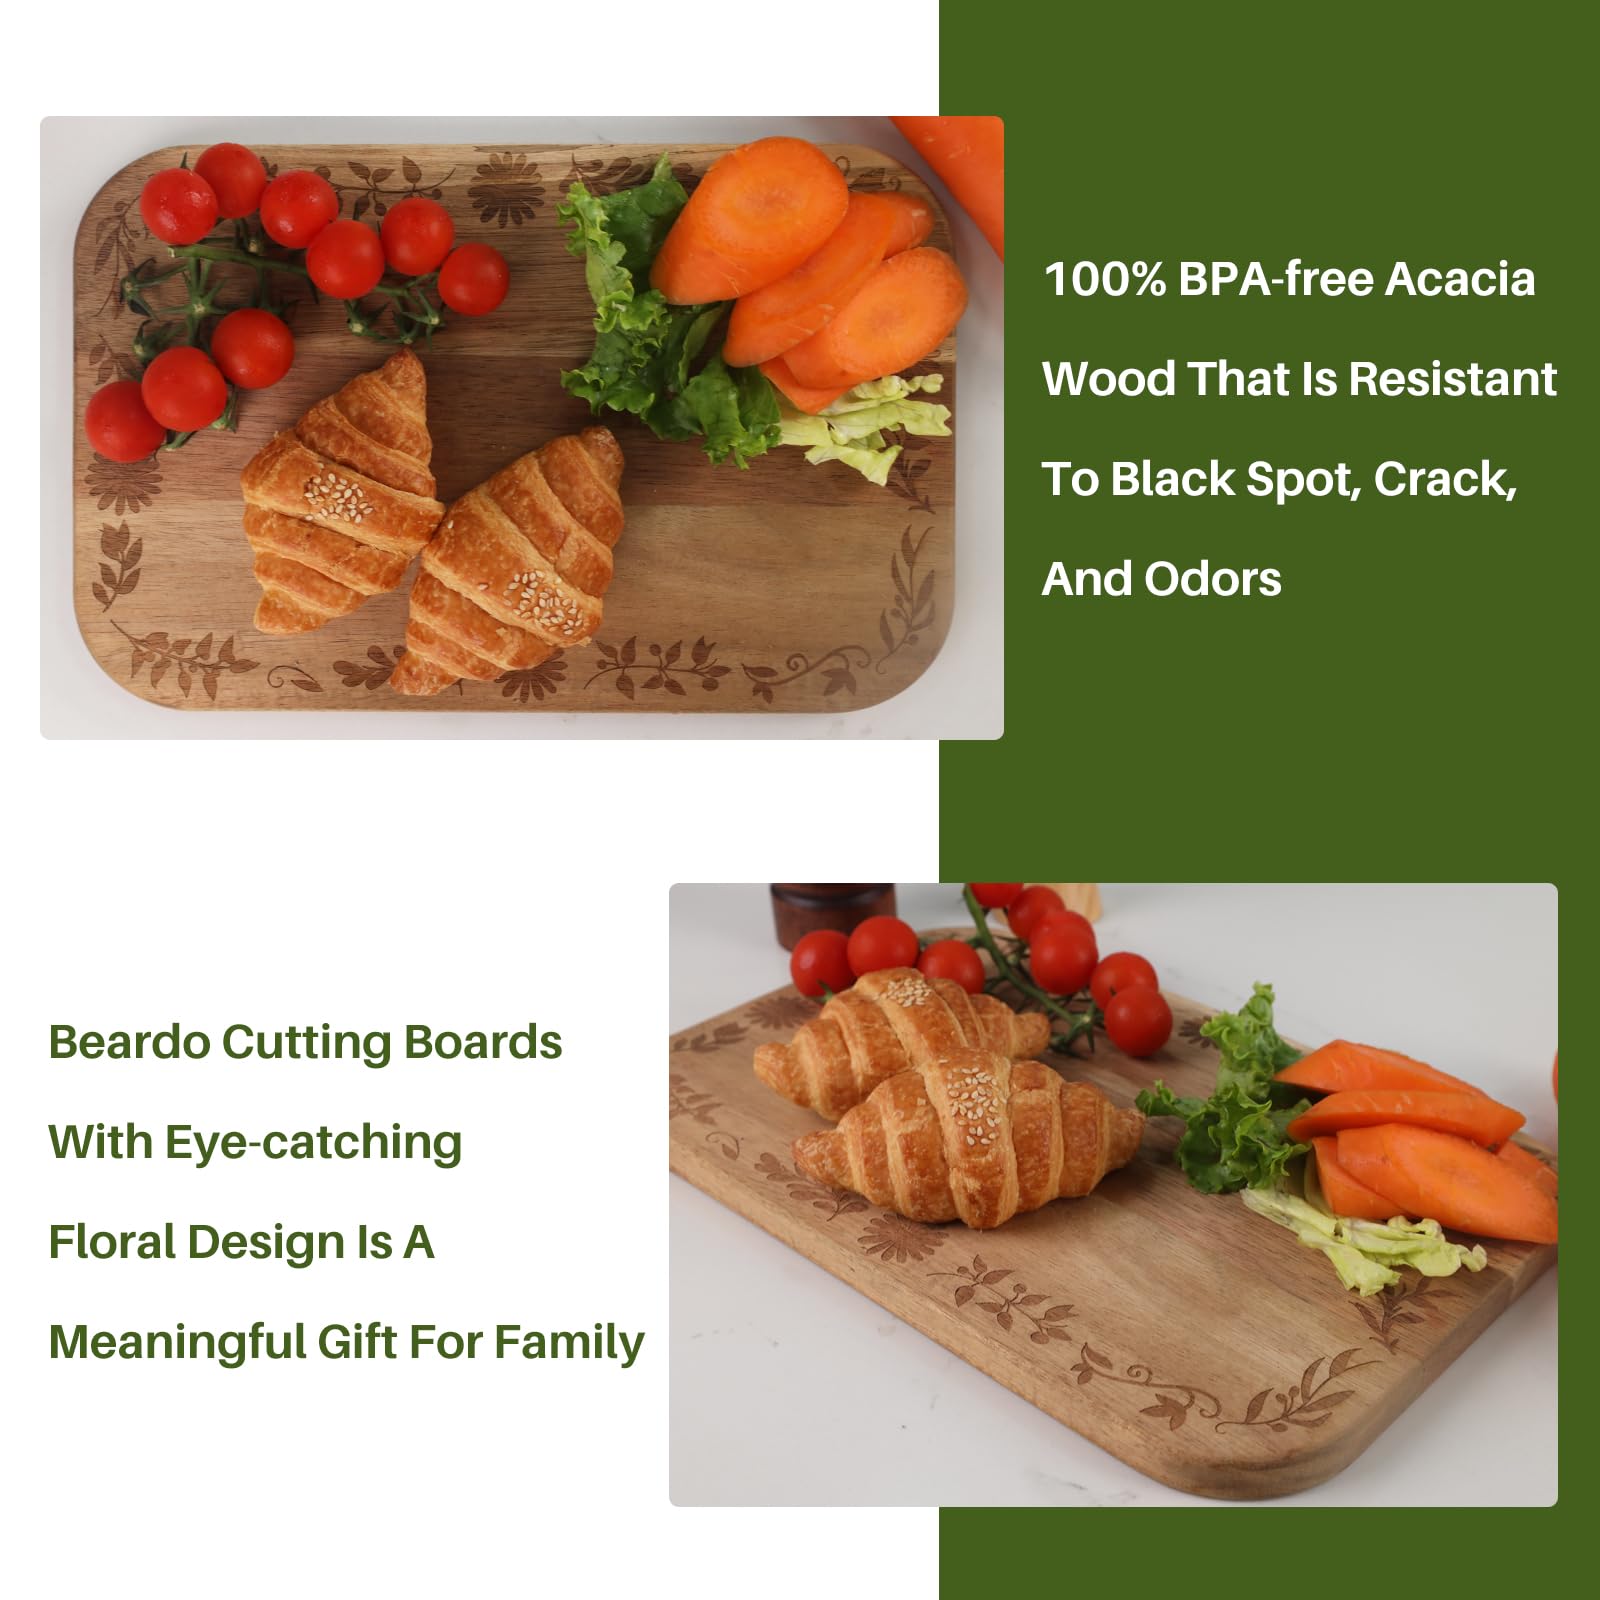 Decorative Cutting Board by Beardo for Kitchen Acacia Cute Wood Cutting Boards Set Large Medium and Small Sizes with Floral